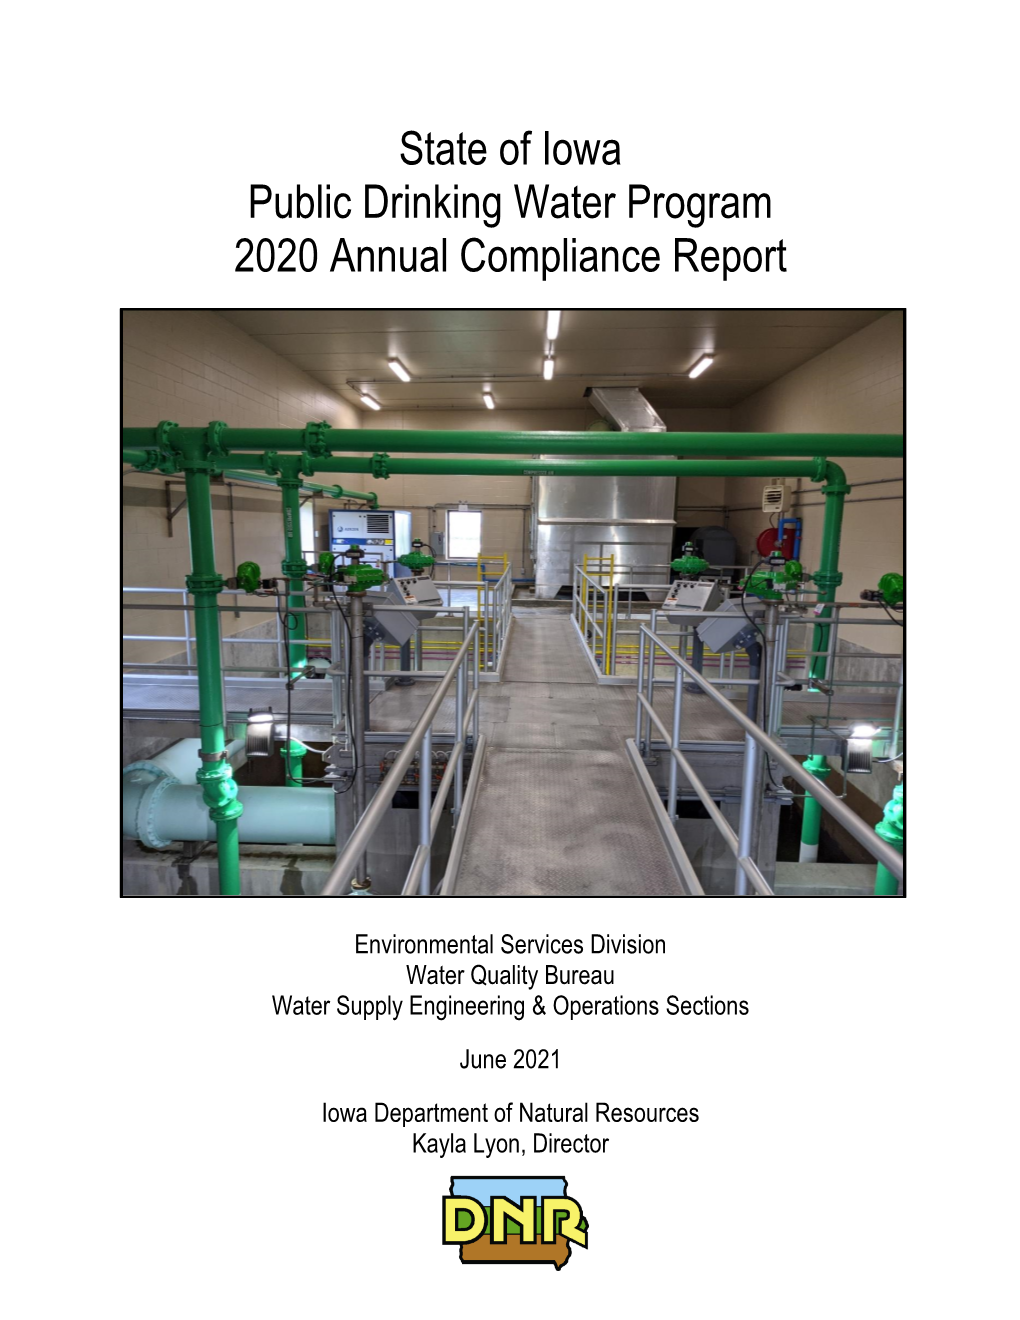 State of Iowa Public Drinking Water Program 2020 Annual Compliance Report